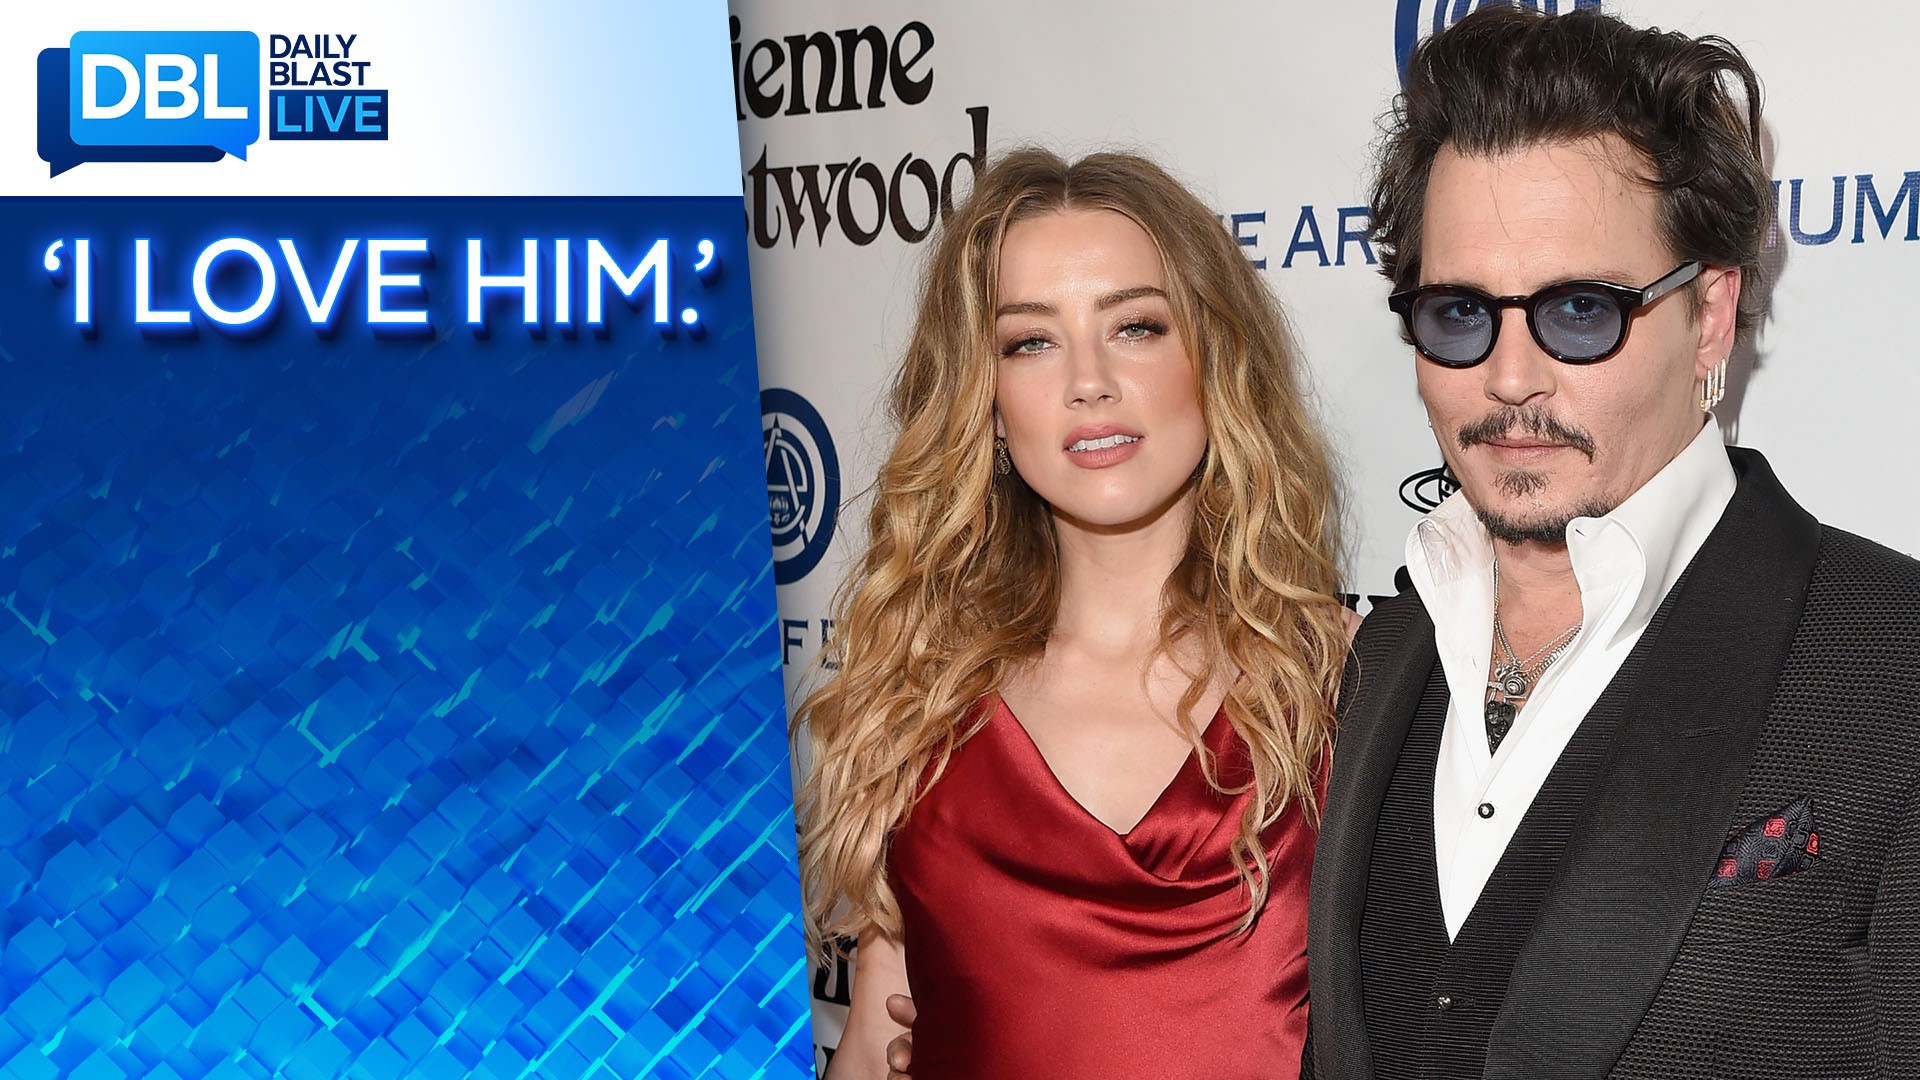 During her interview with NBC's 'Today' show, Amber Heard told Savannah Guthrie explains her feelings toward Johnny Depp after their explosive trial.